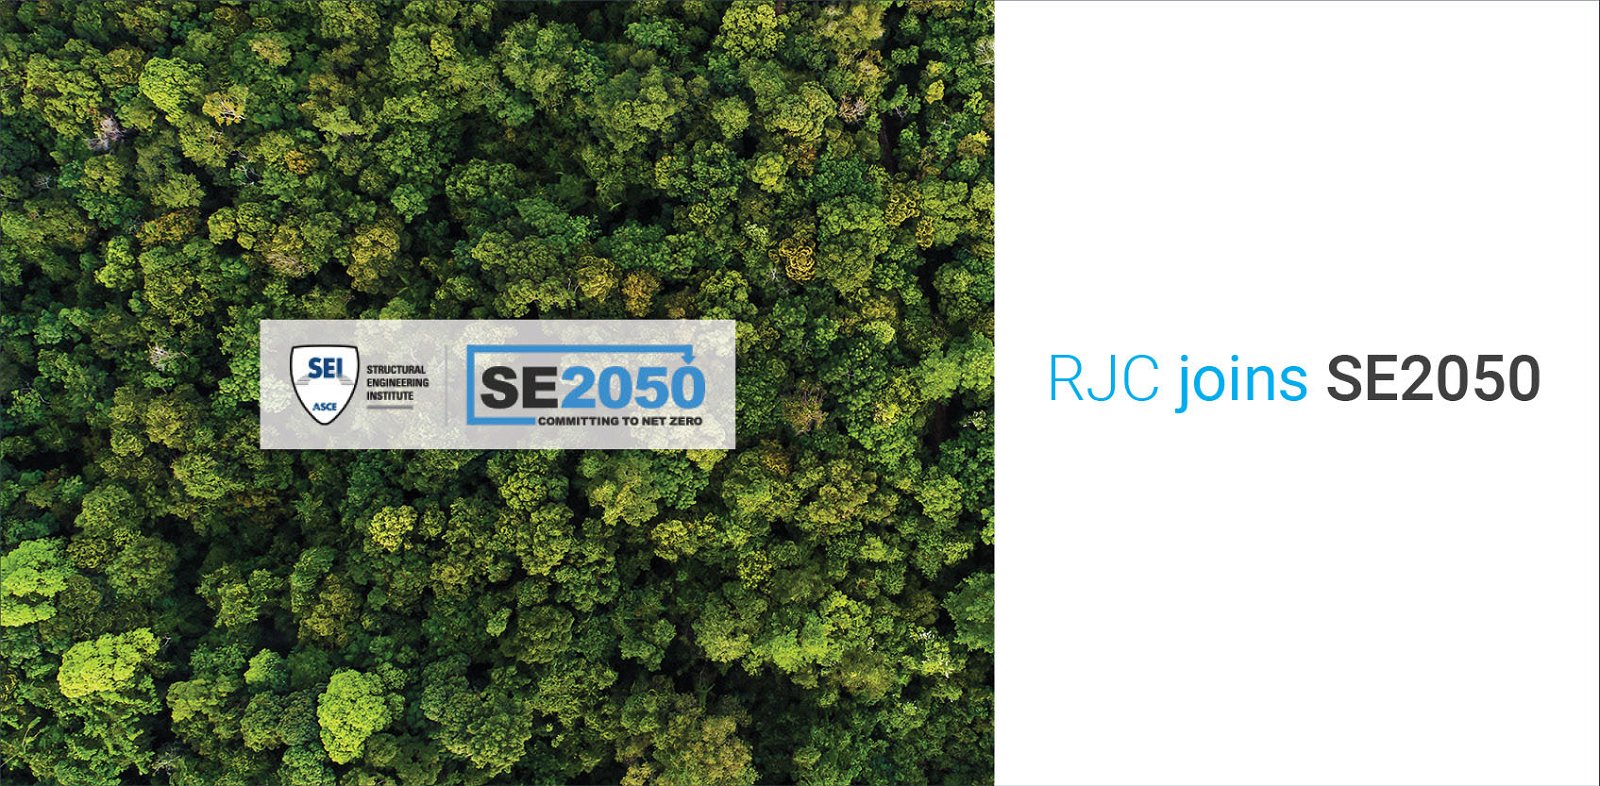 RJC Engineers Joins SE2050 as a Signatory